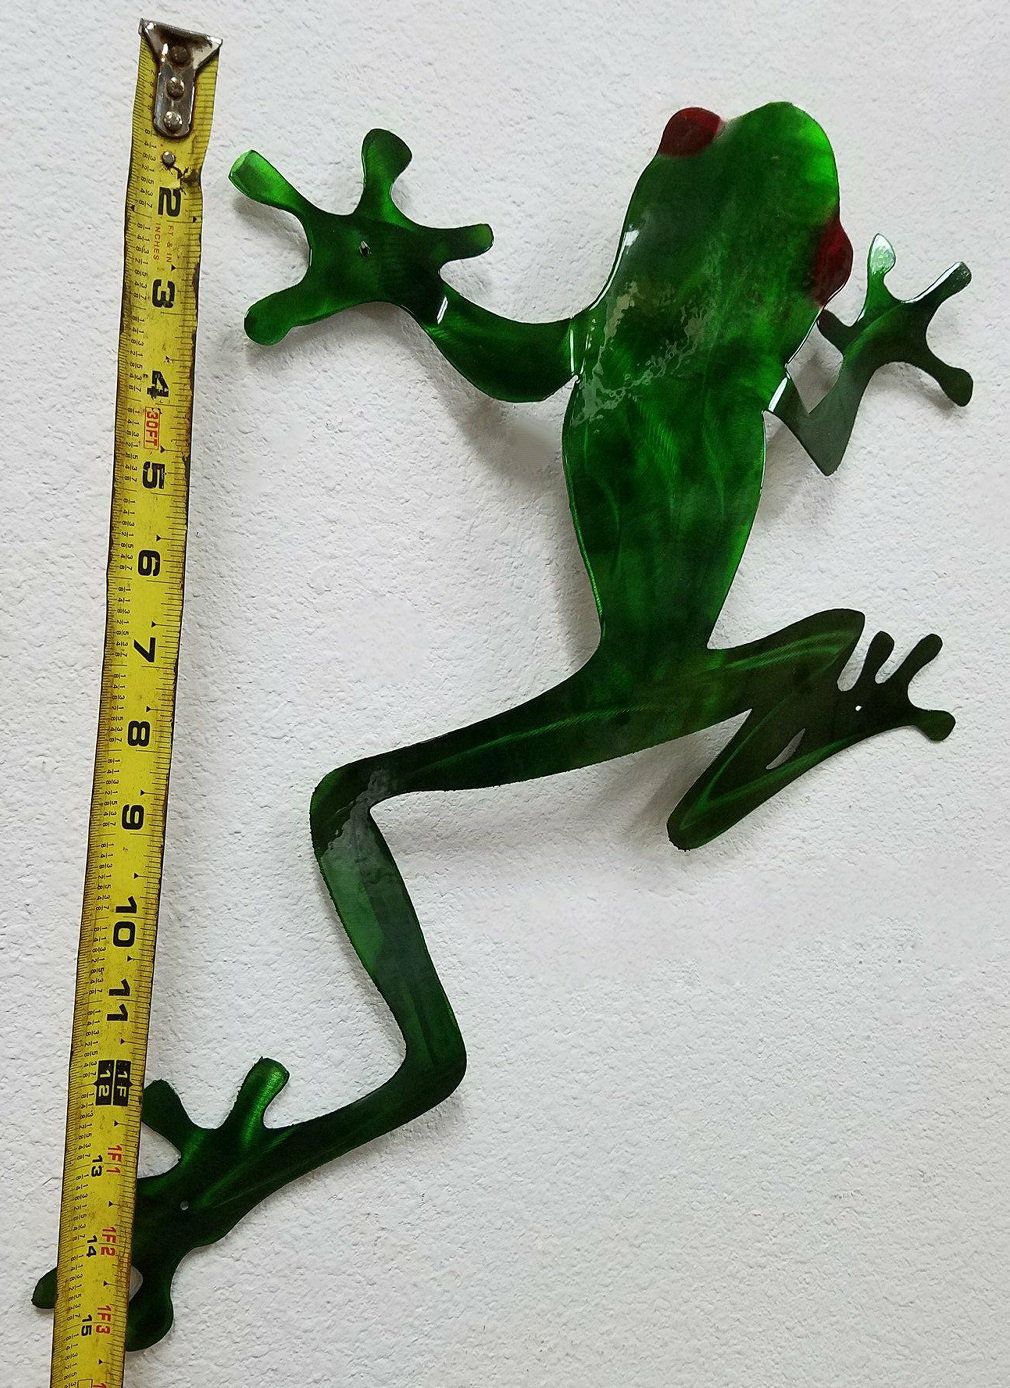 Stainless Steel Tree Frog Rainforest Wall Art, Tree Frog Metal Art,  Stainless Red Eyed Tree Frog Outdoor Wall Decor, Jungle Decor Intended For 2018 Frog Wall Art (View 18 of 20)